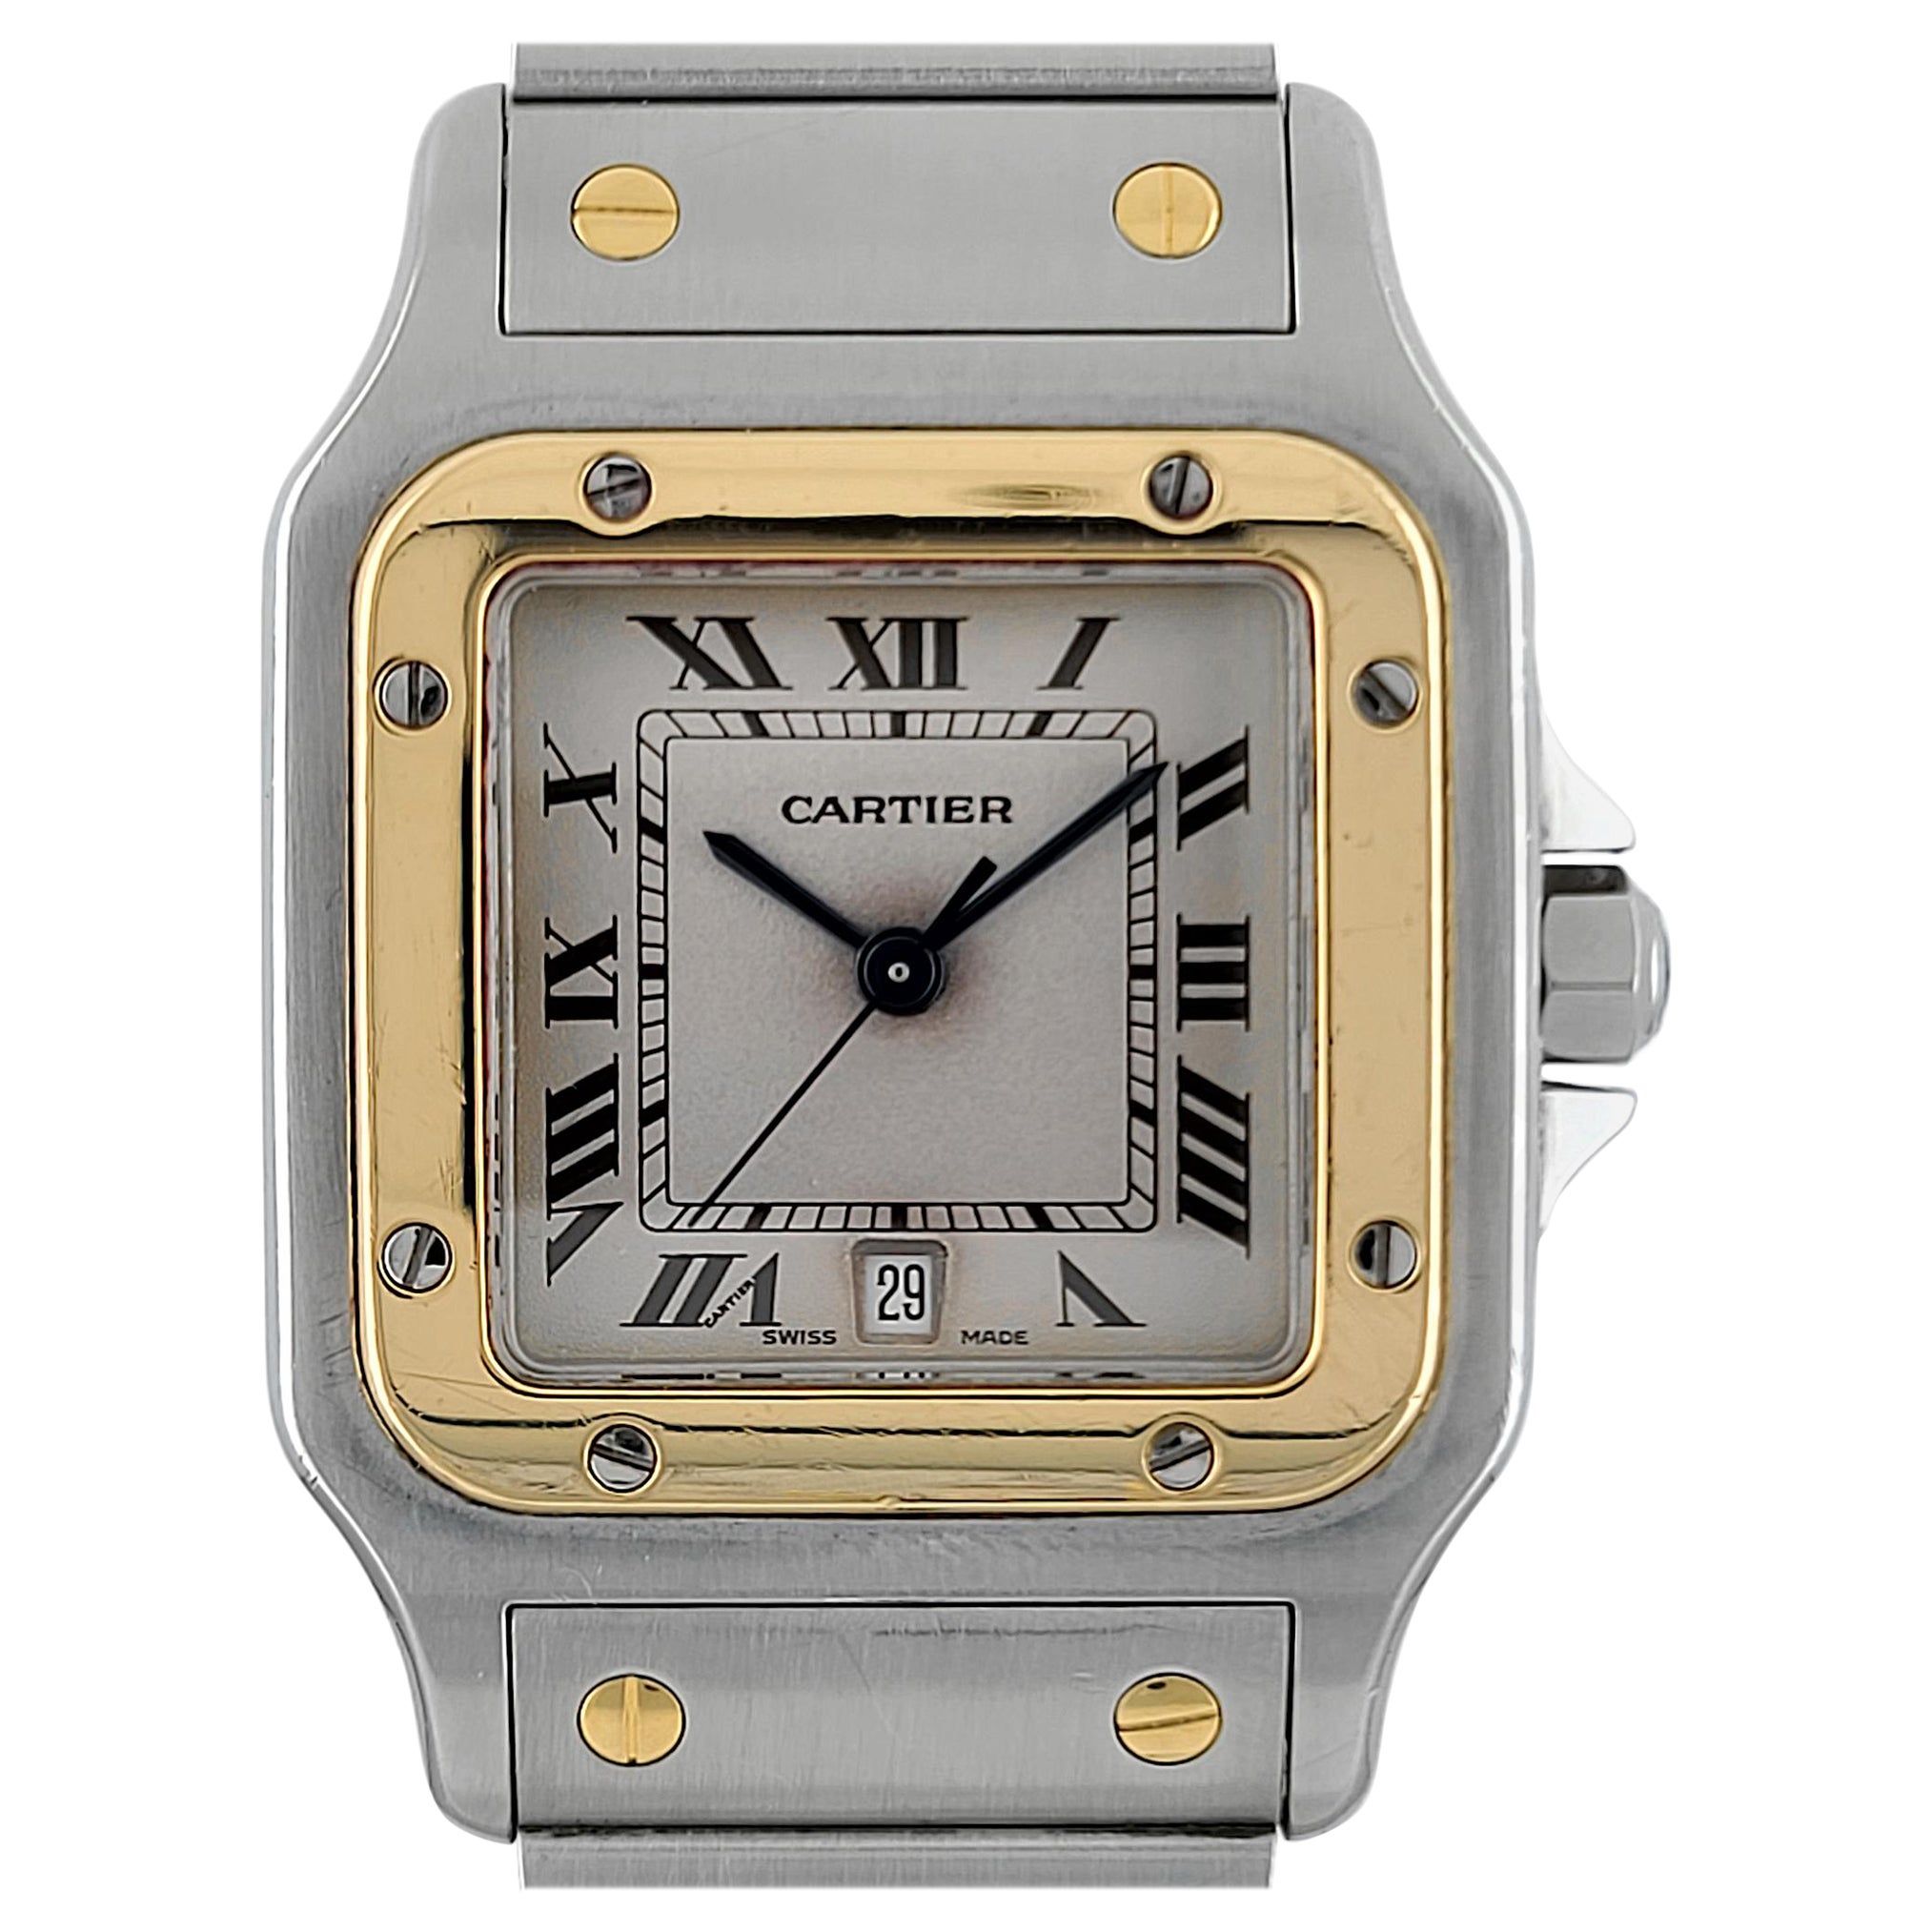 Cartier Santos Galbee Date 1566 Large LM GM 18k Gold Stainless Steel Carree